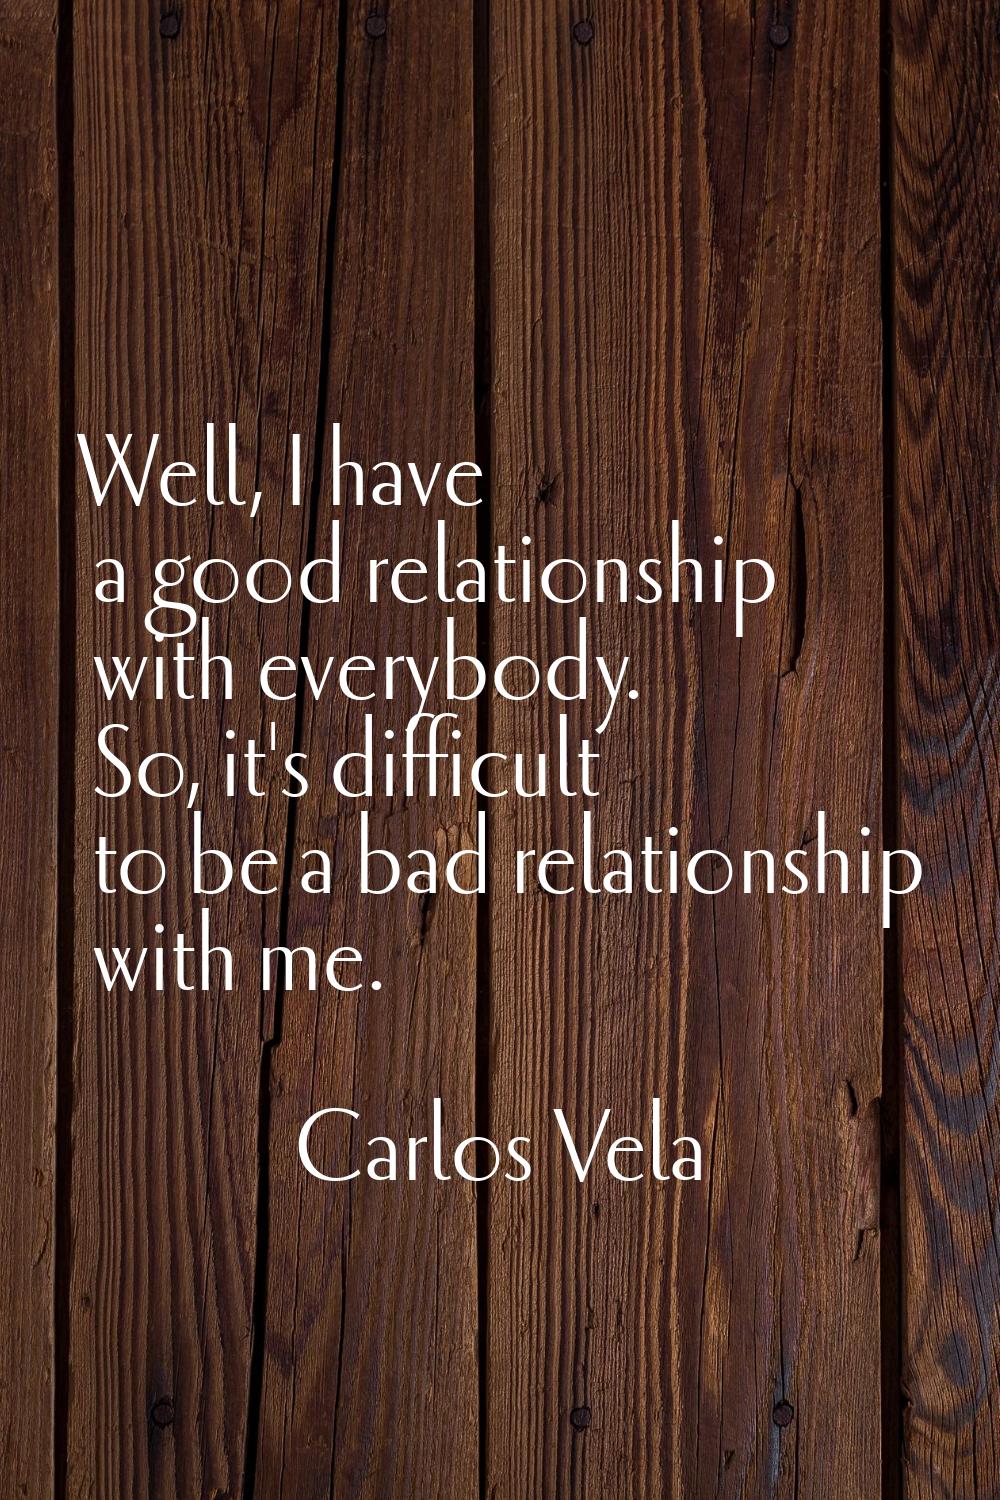 Well, I have a good relationship with everybody. So, it's difficult to be a bad relationship with m